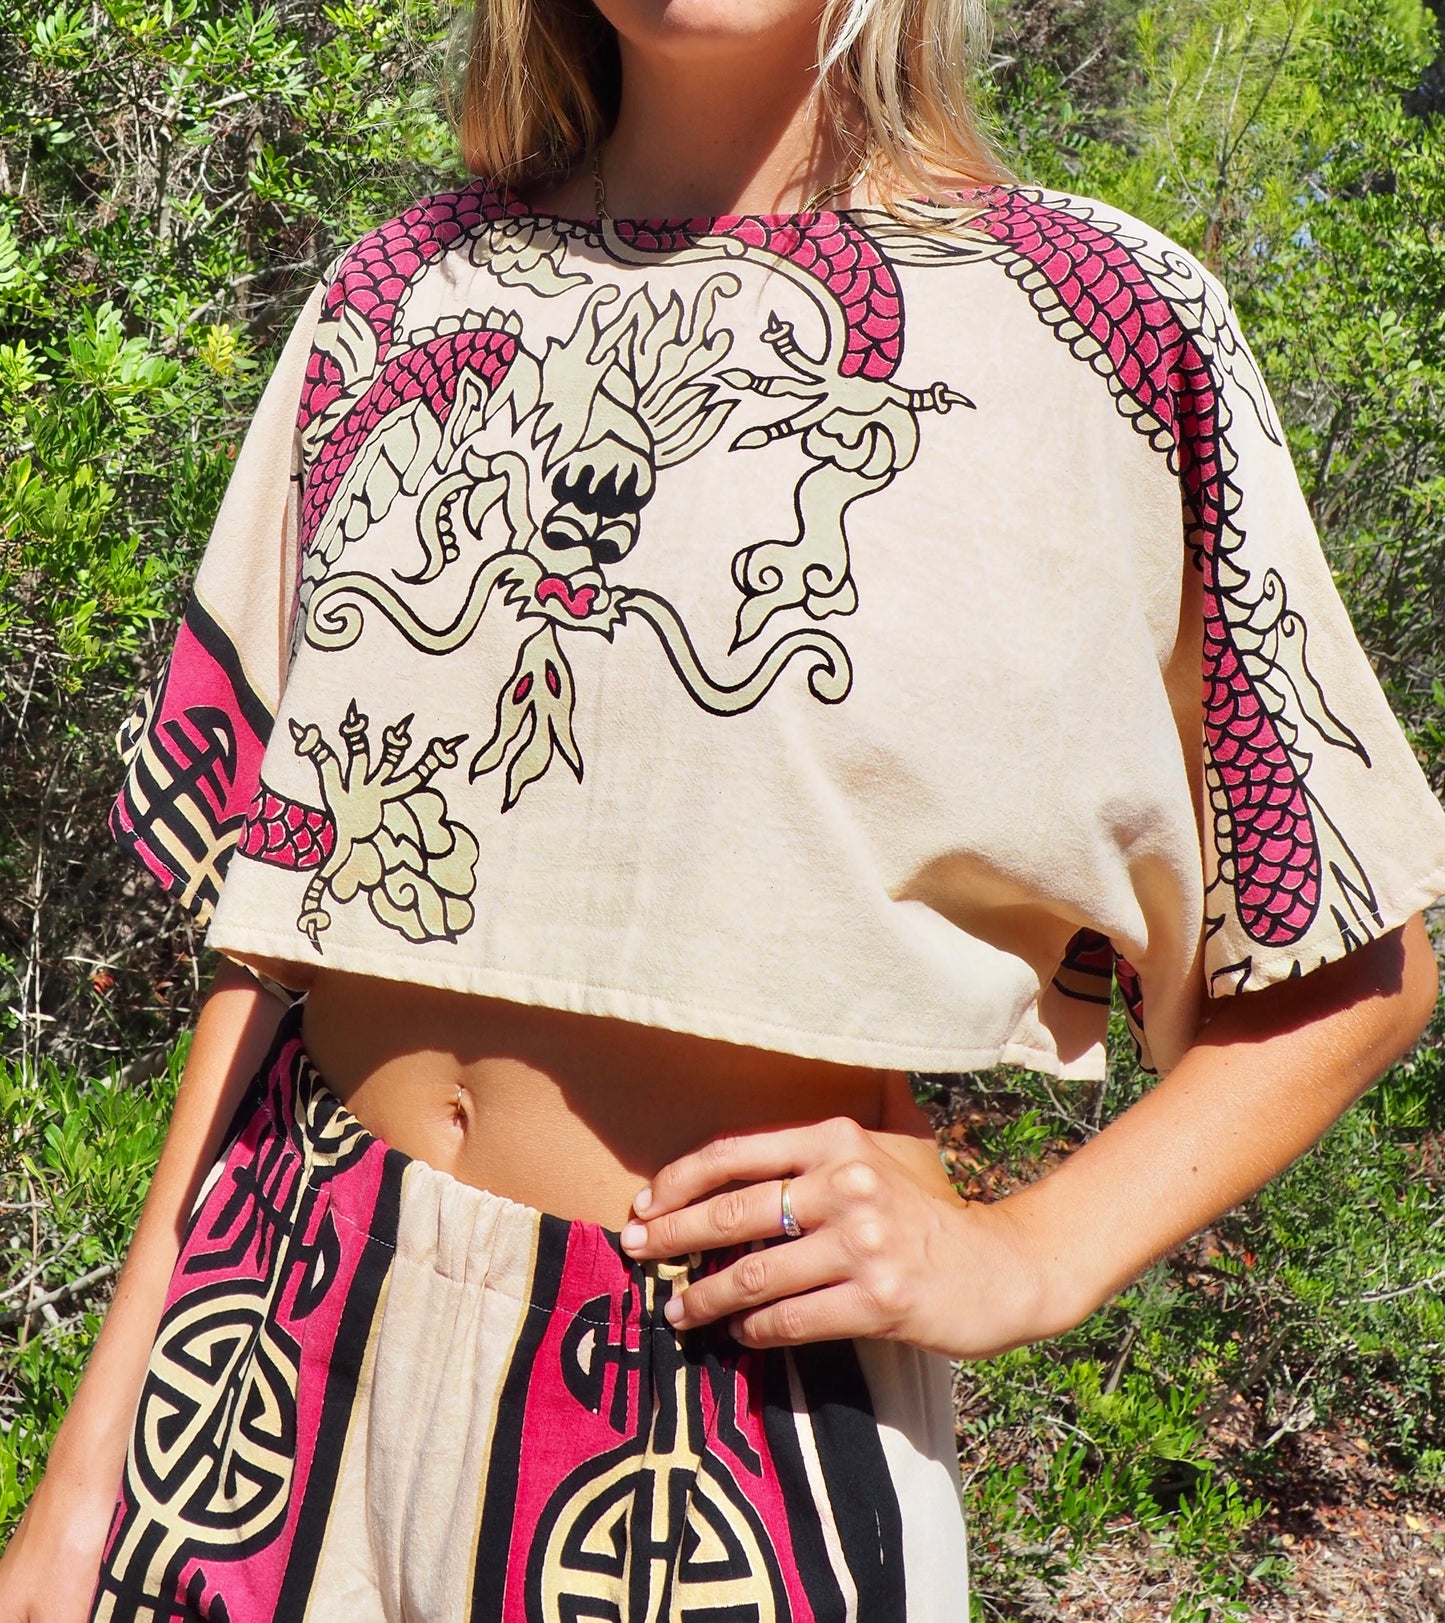 Up-cycled vintage cotton top cream and pink with dragon design by Vagabond Ibiza